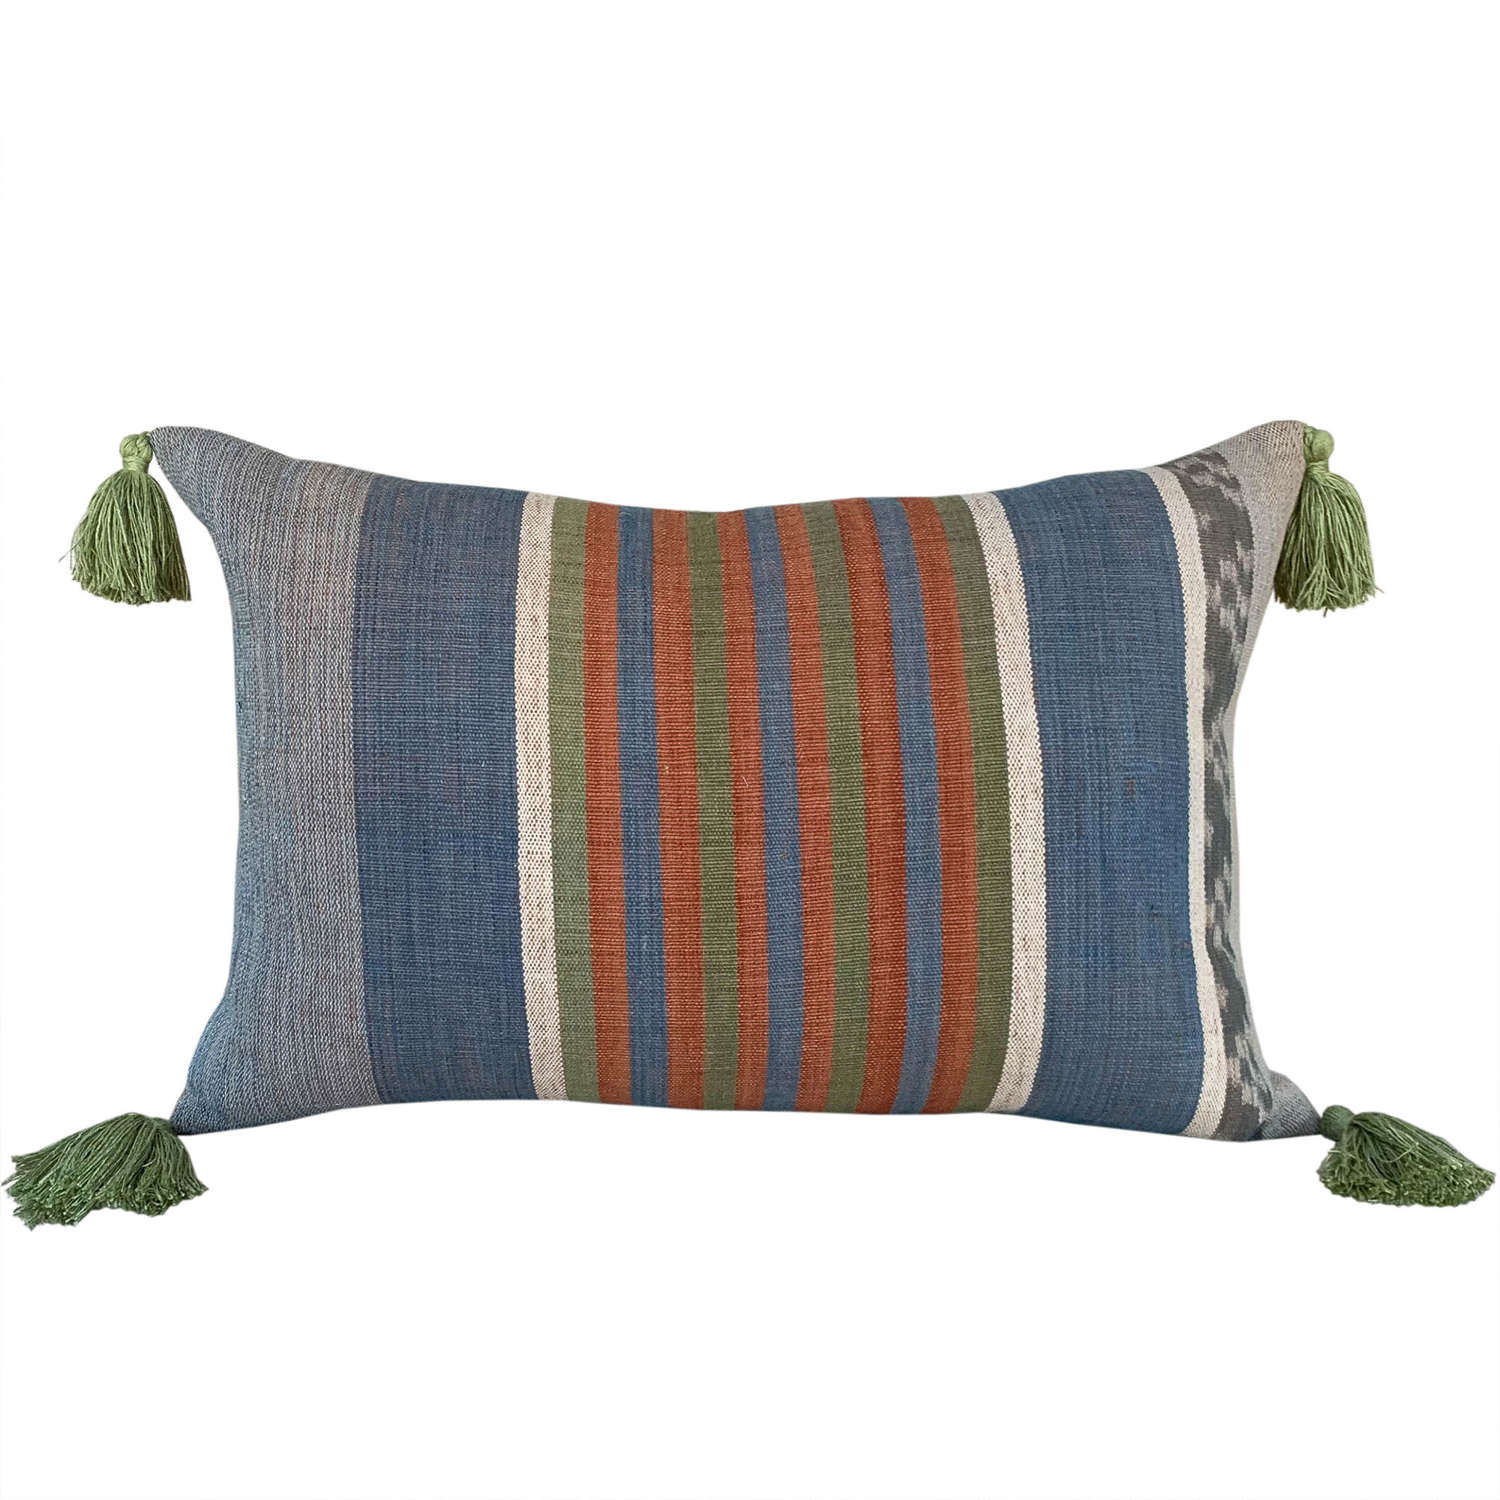 Flores Sikka cushion with green tassels